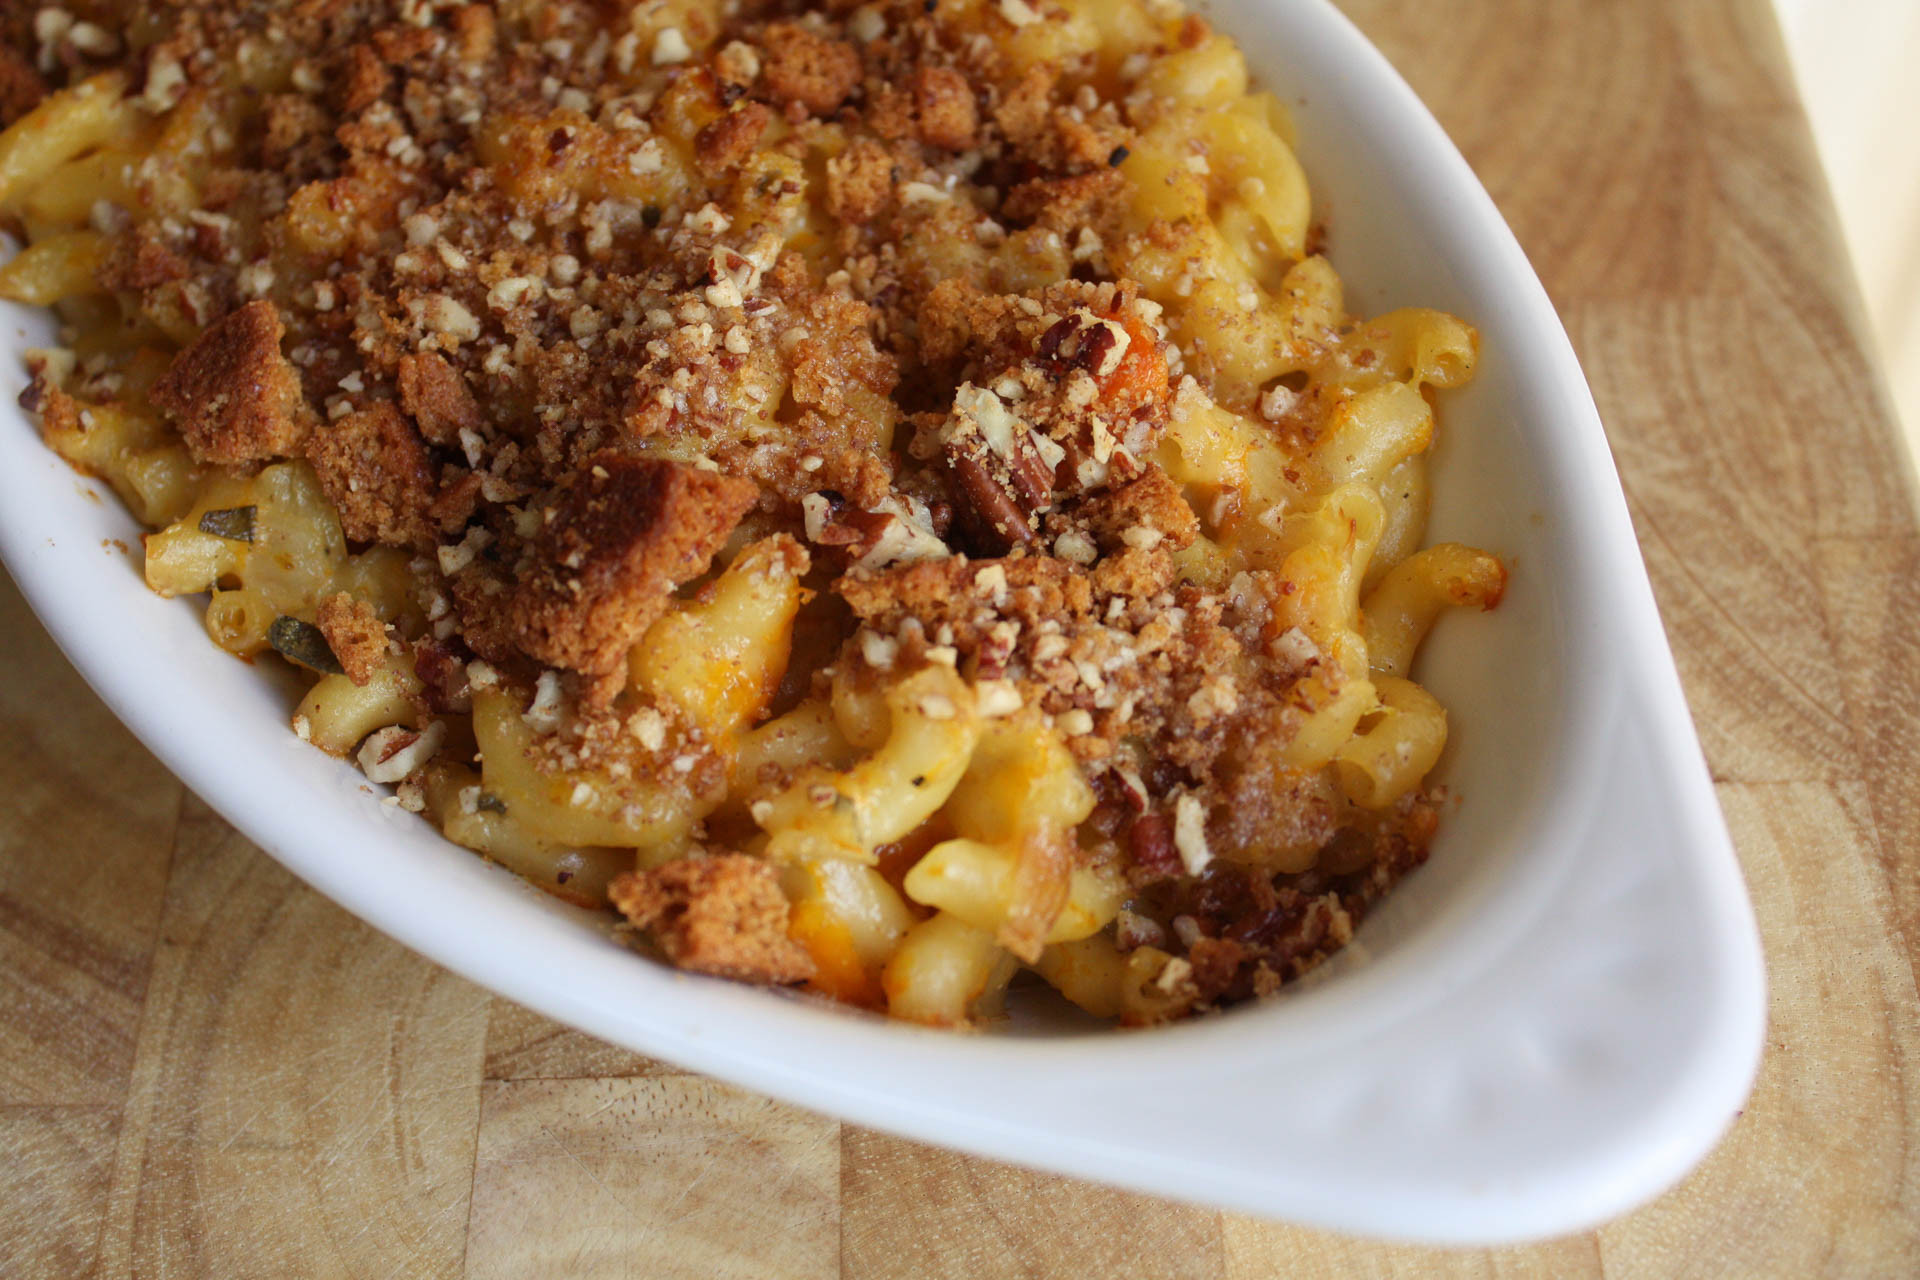 Butternut Squash Mac and Cheese with Sage and Gingersnap-Pecan Crust